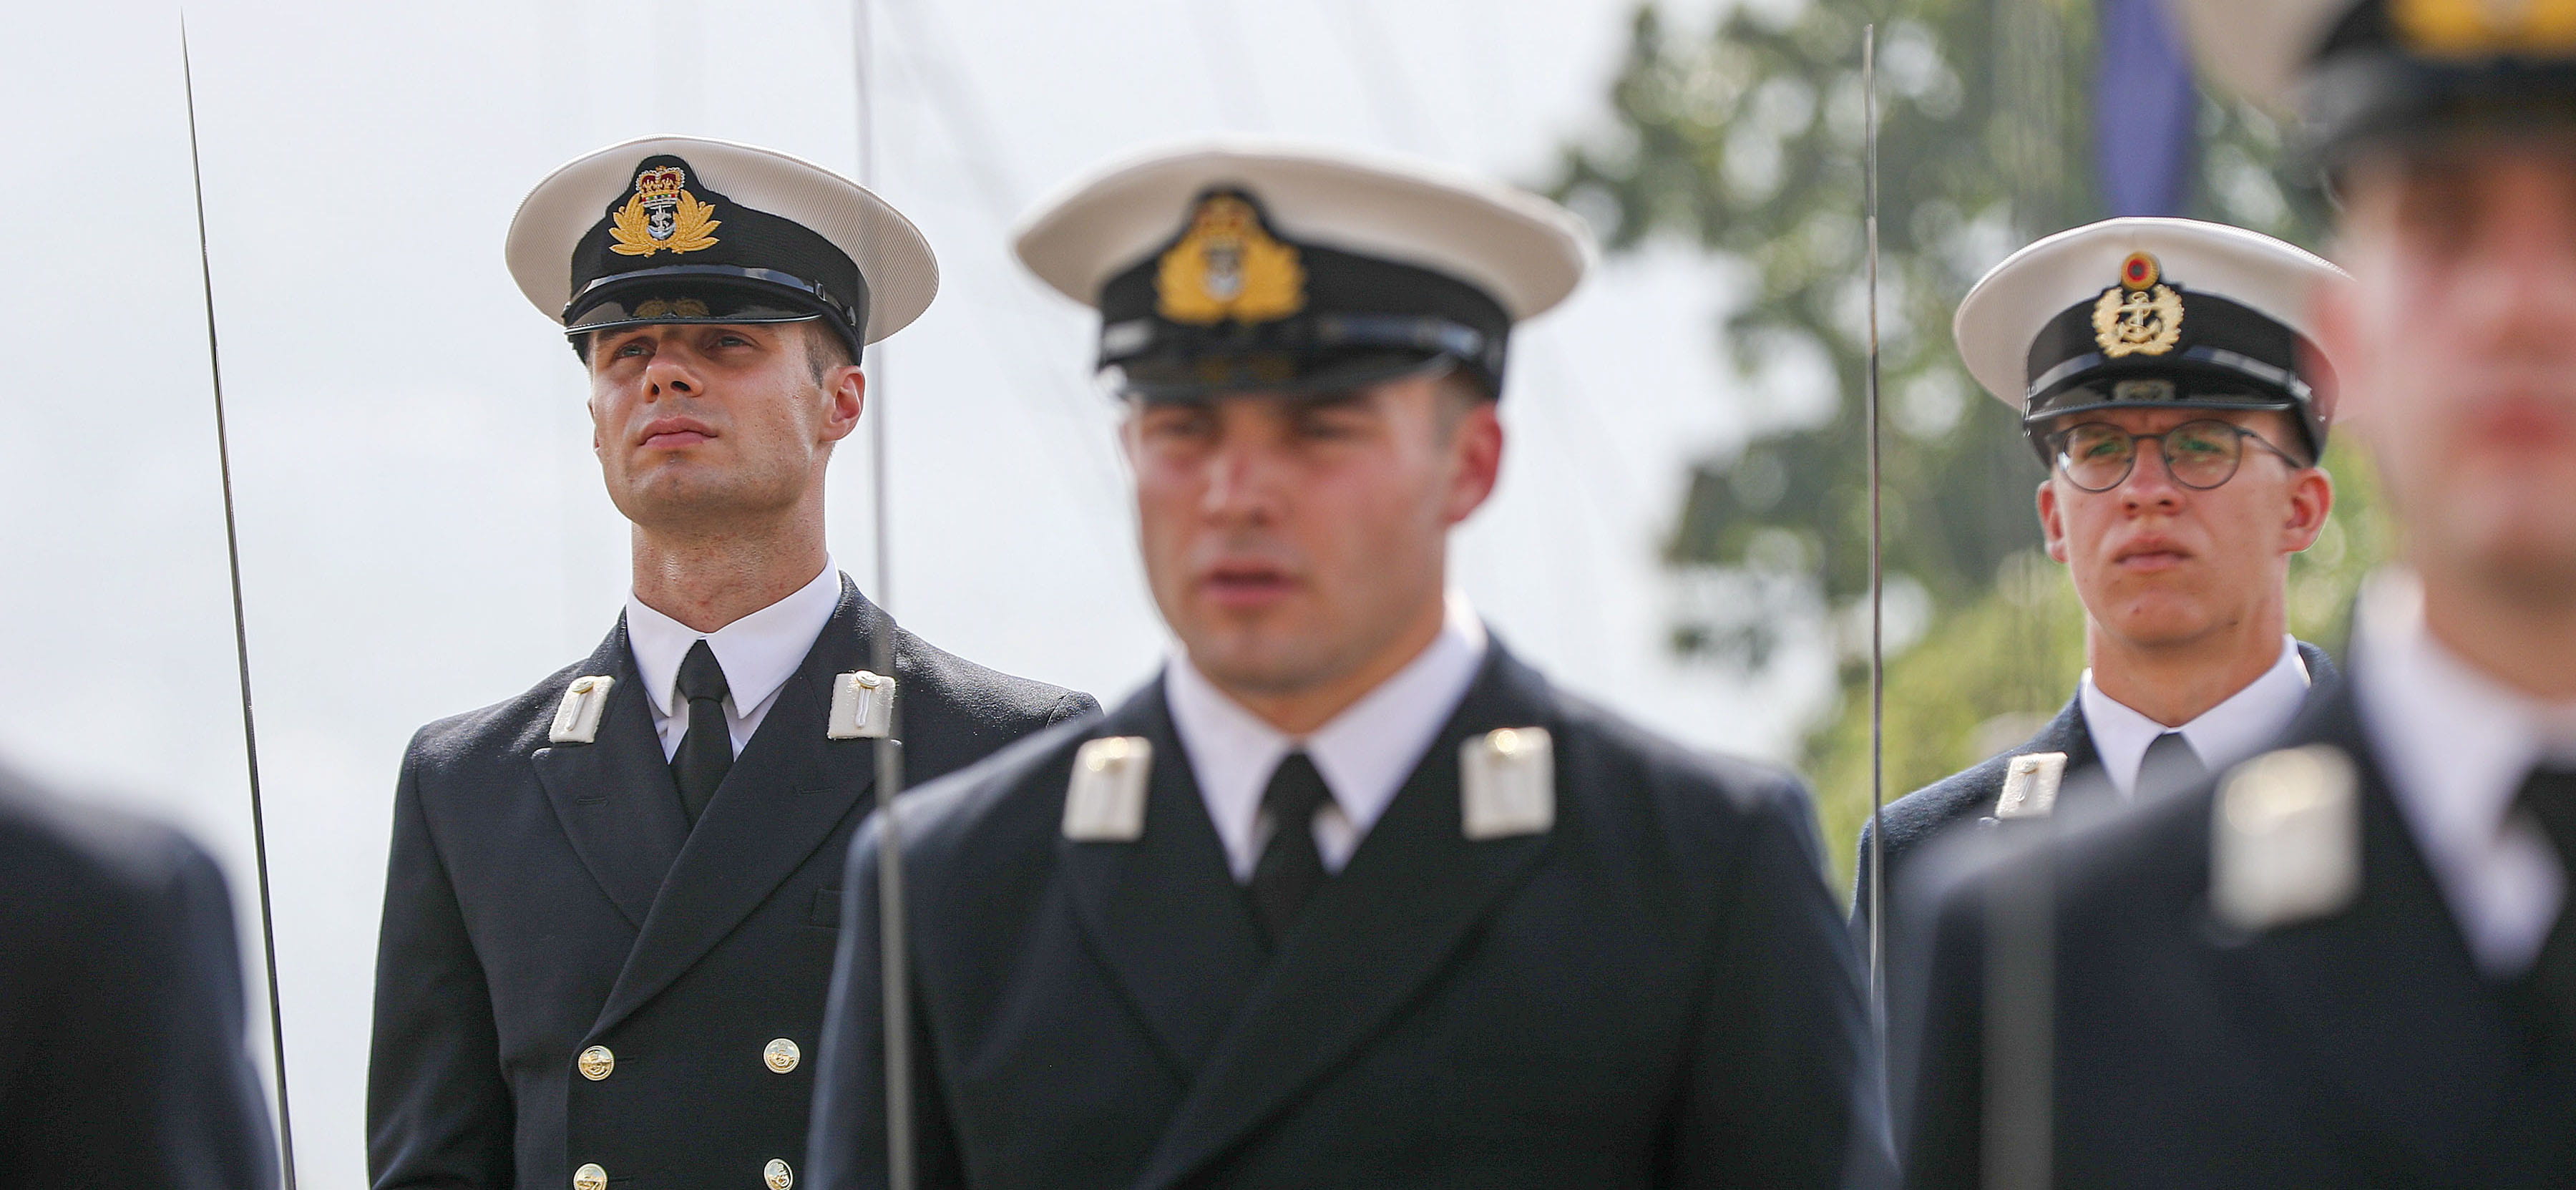 ROYAL NAVY OFFICERS AND RATINGS STAND READY TO SERVE